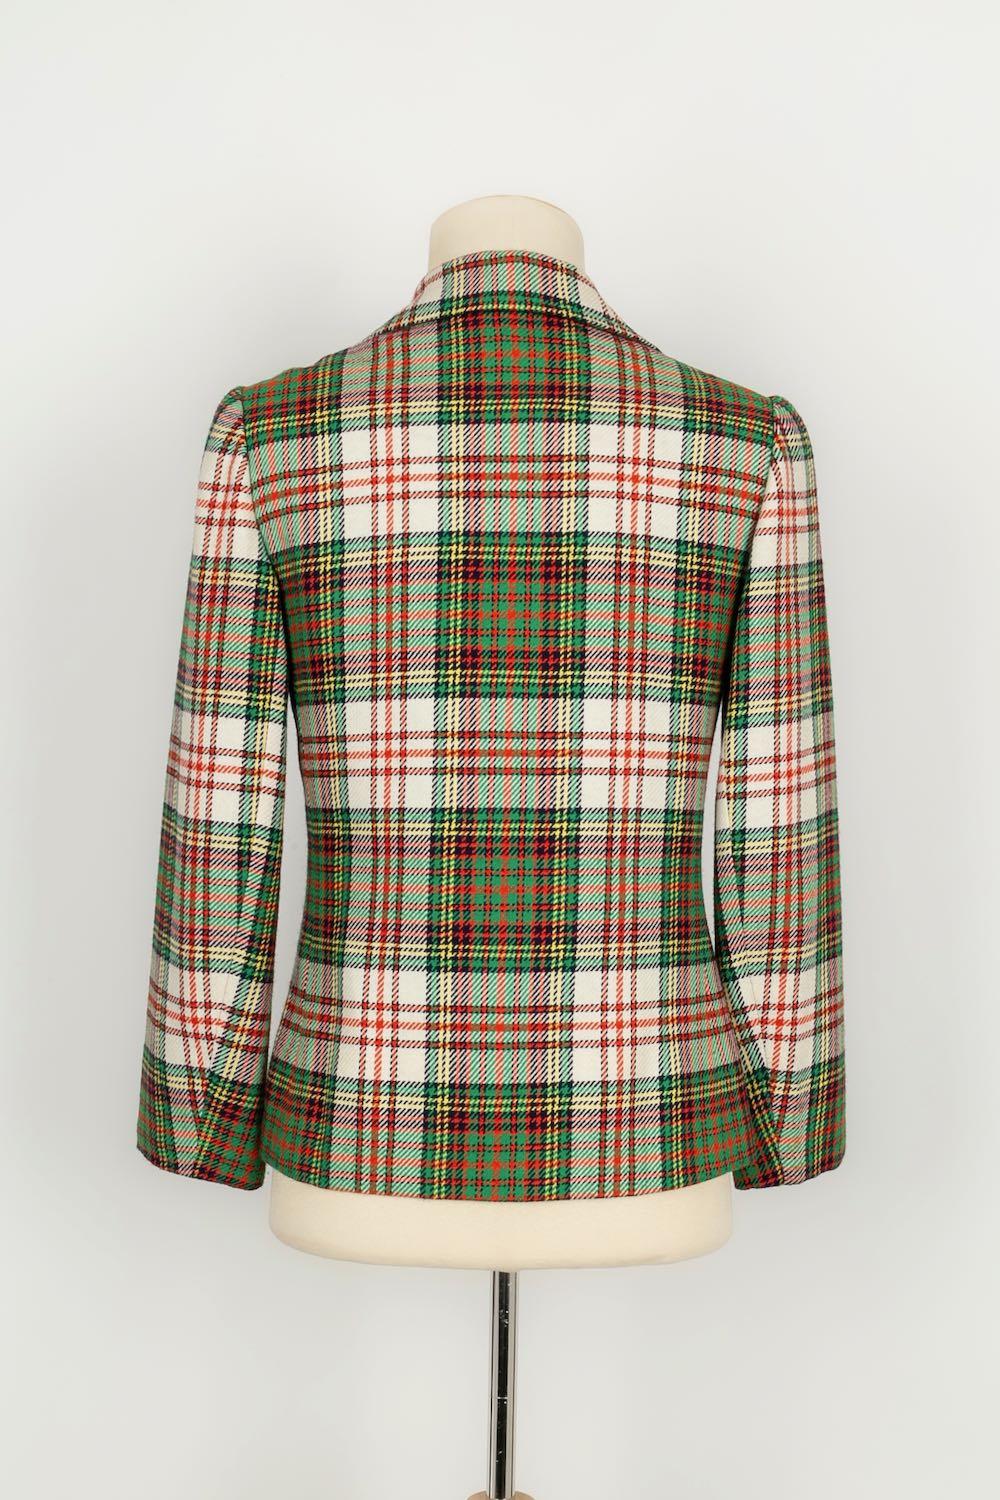 Carven Haute Couture Wool and Silk Lining Suit, 1960 For Sale 1